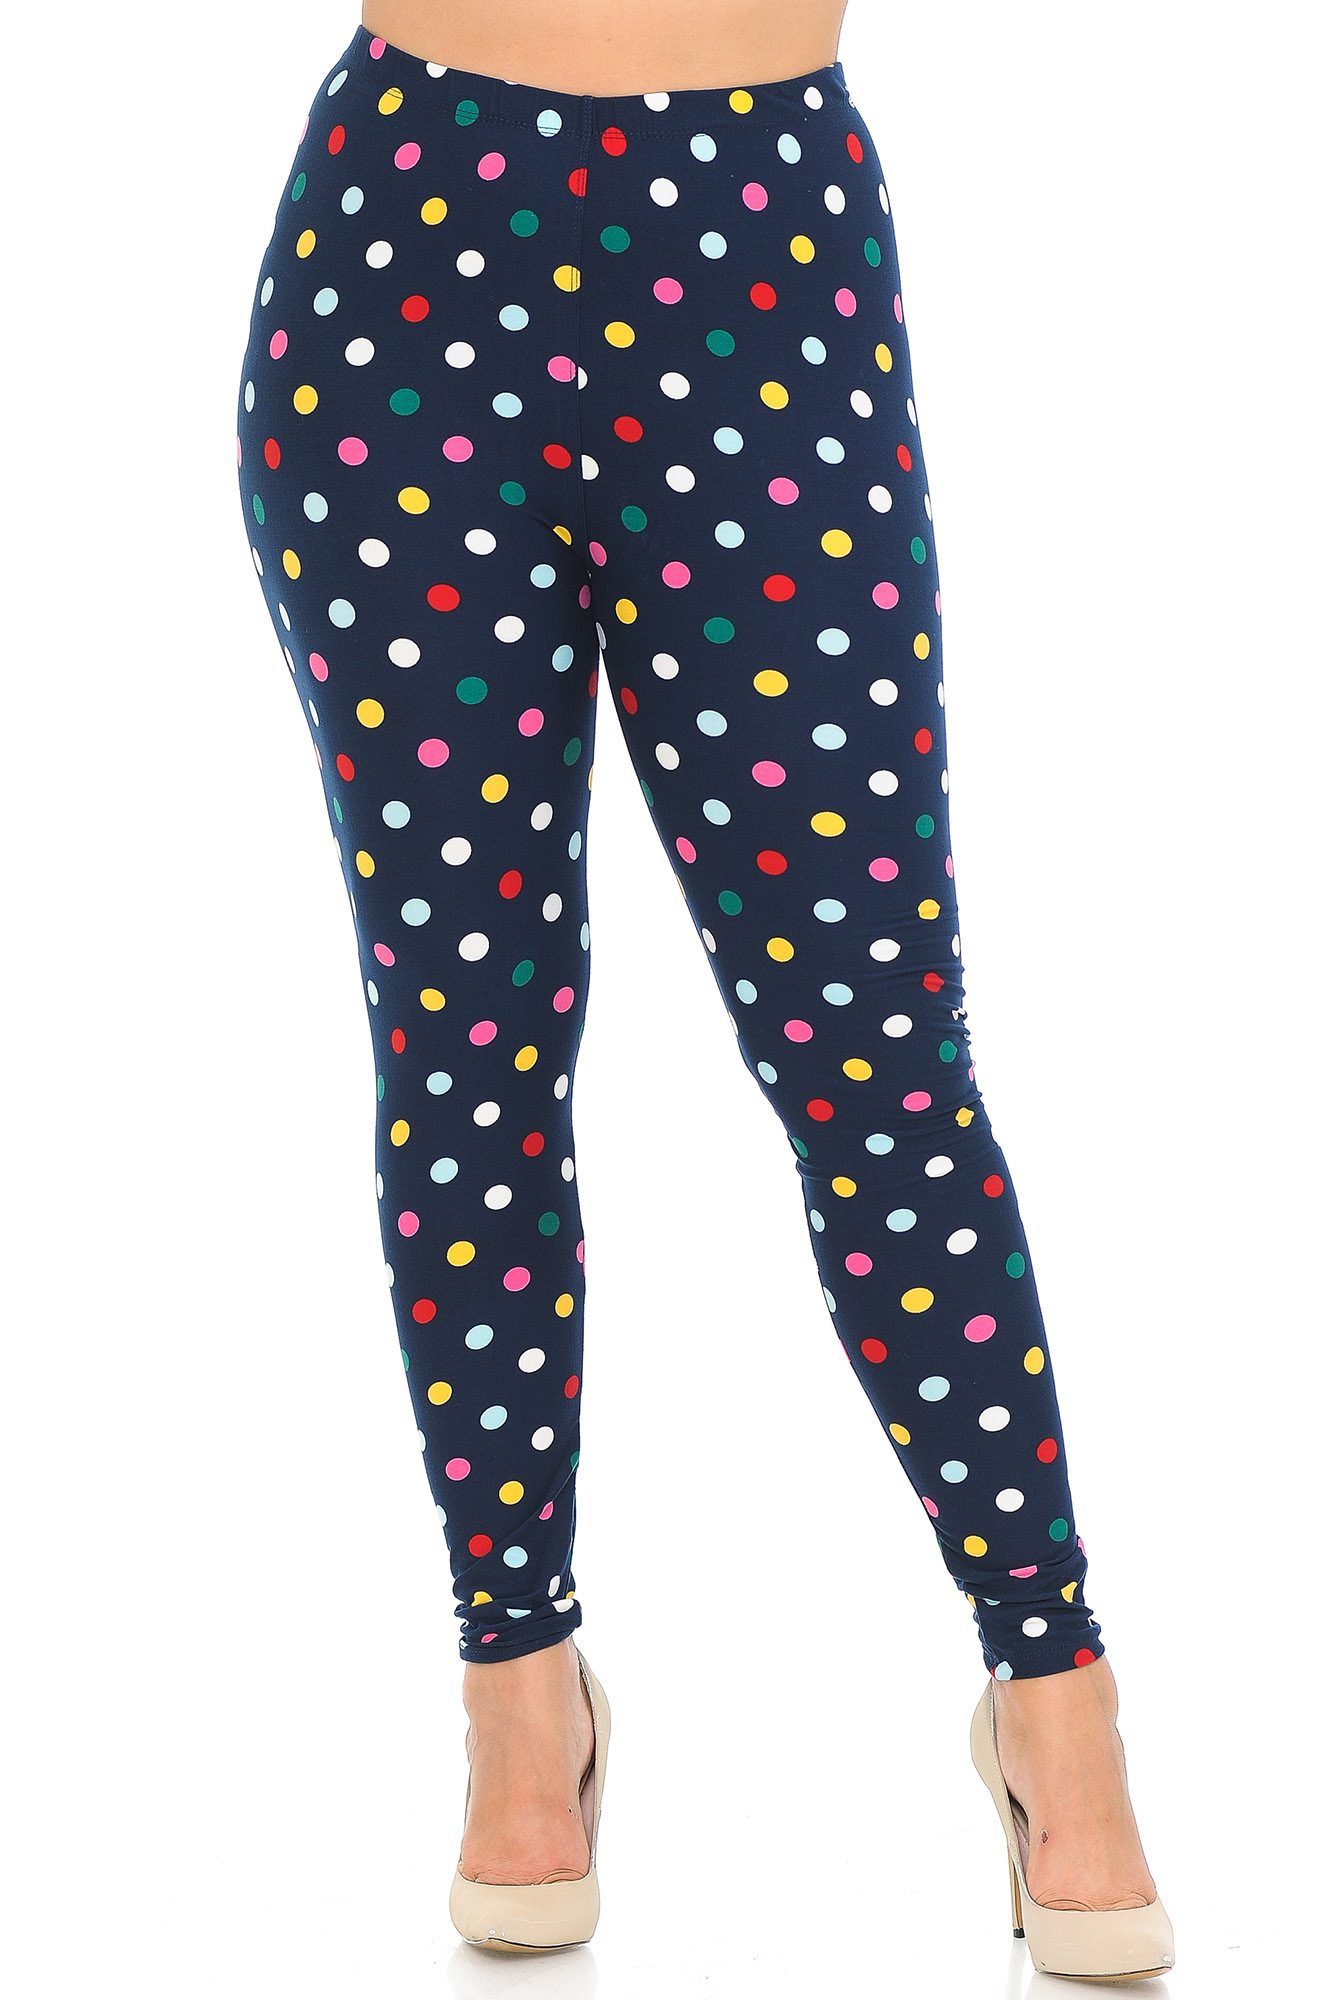 Wholesale Buttery Smooth Colorful Polka Dot Plus Size Leggings - 3X-5X